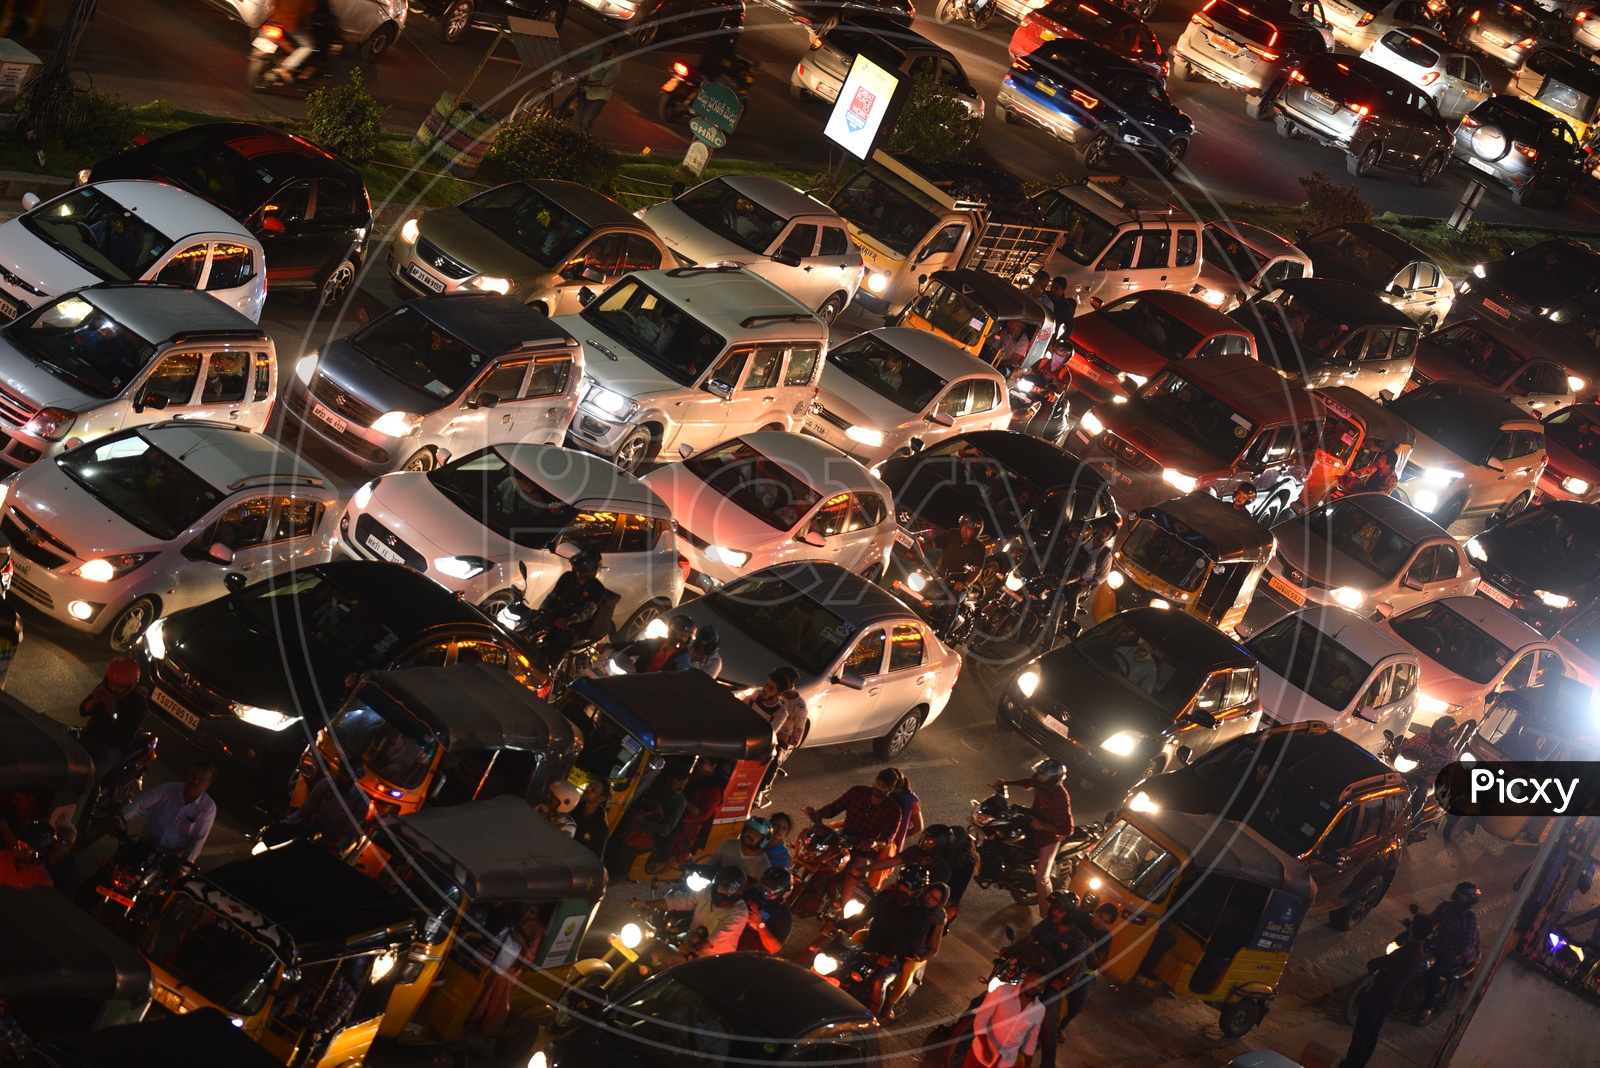 Traffic Jam In A Metropolitan  City At a Traffic Signal With Cars, Bikes And Autos Stranded